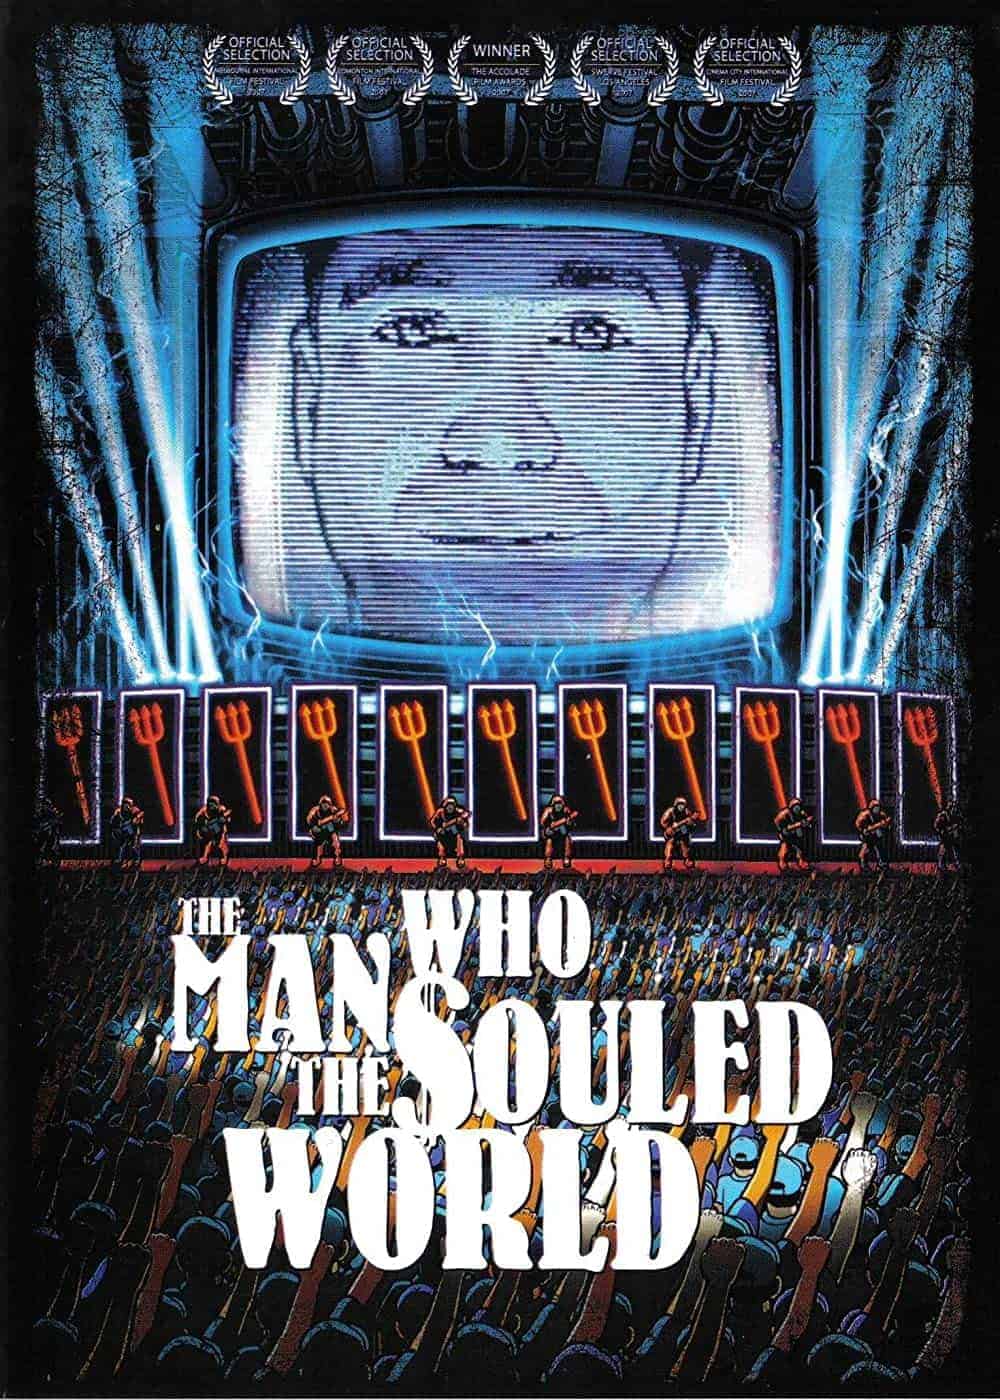 The Man Who Souled the World (2007) Best Skate Films to See This Weekend